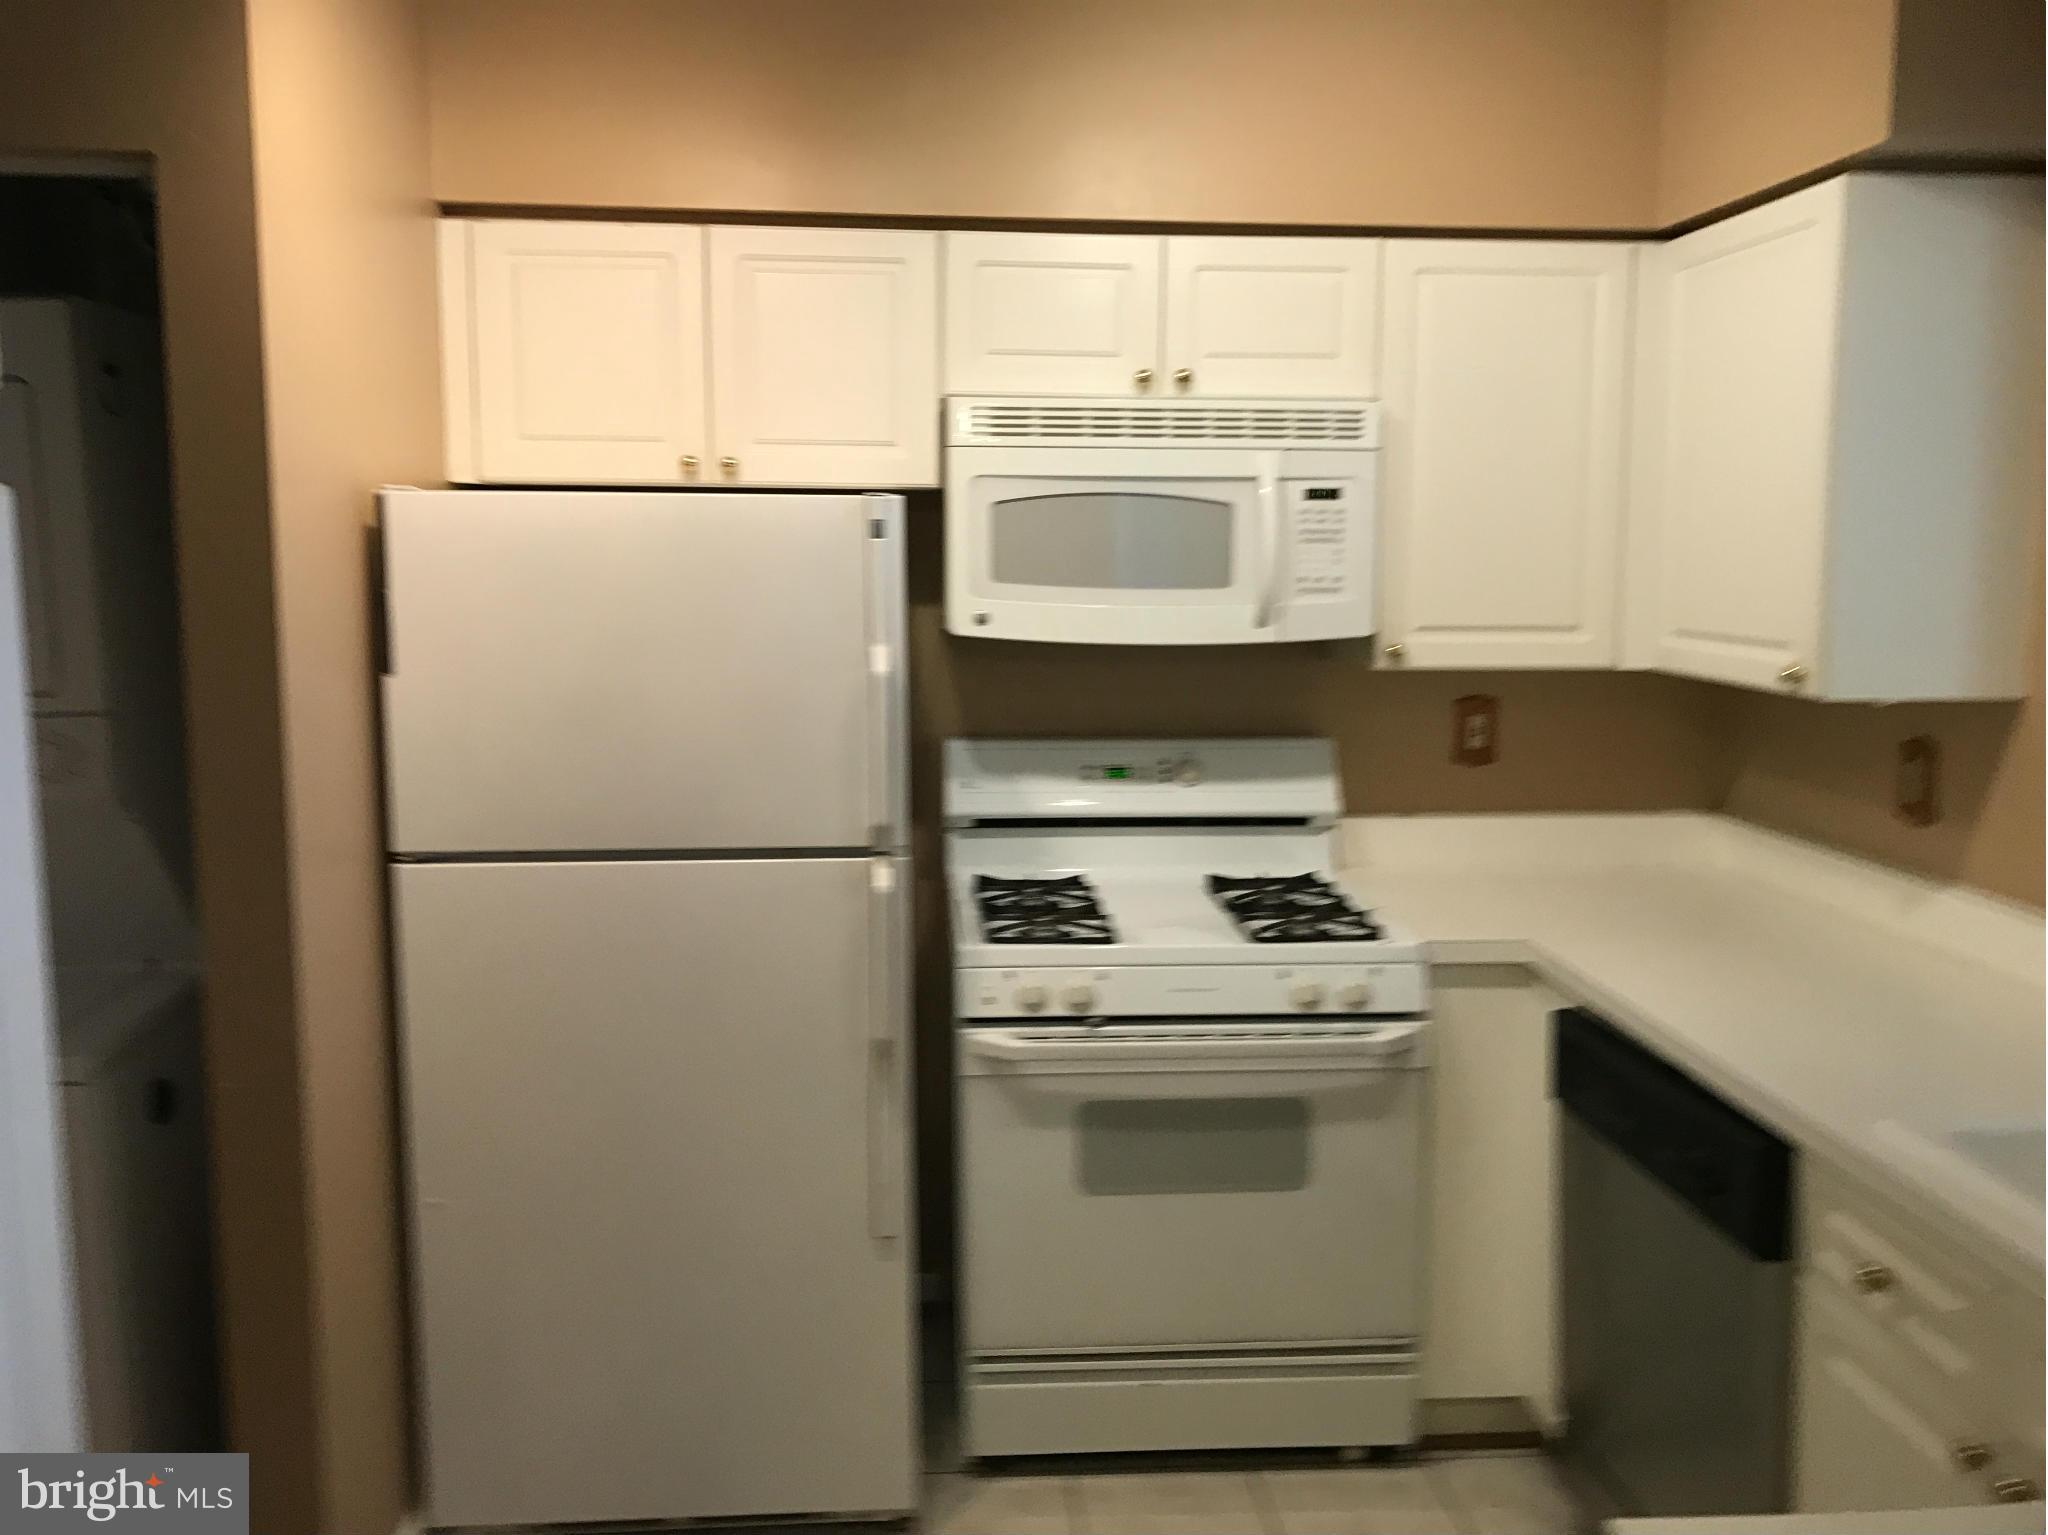 a white refrigerator freezer and a stove sitting inside of a kitchen